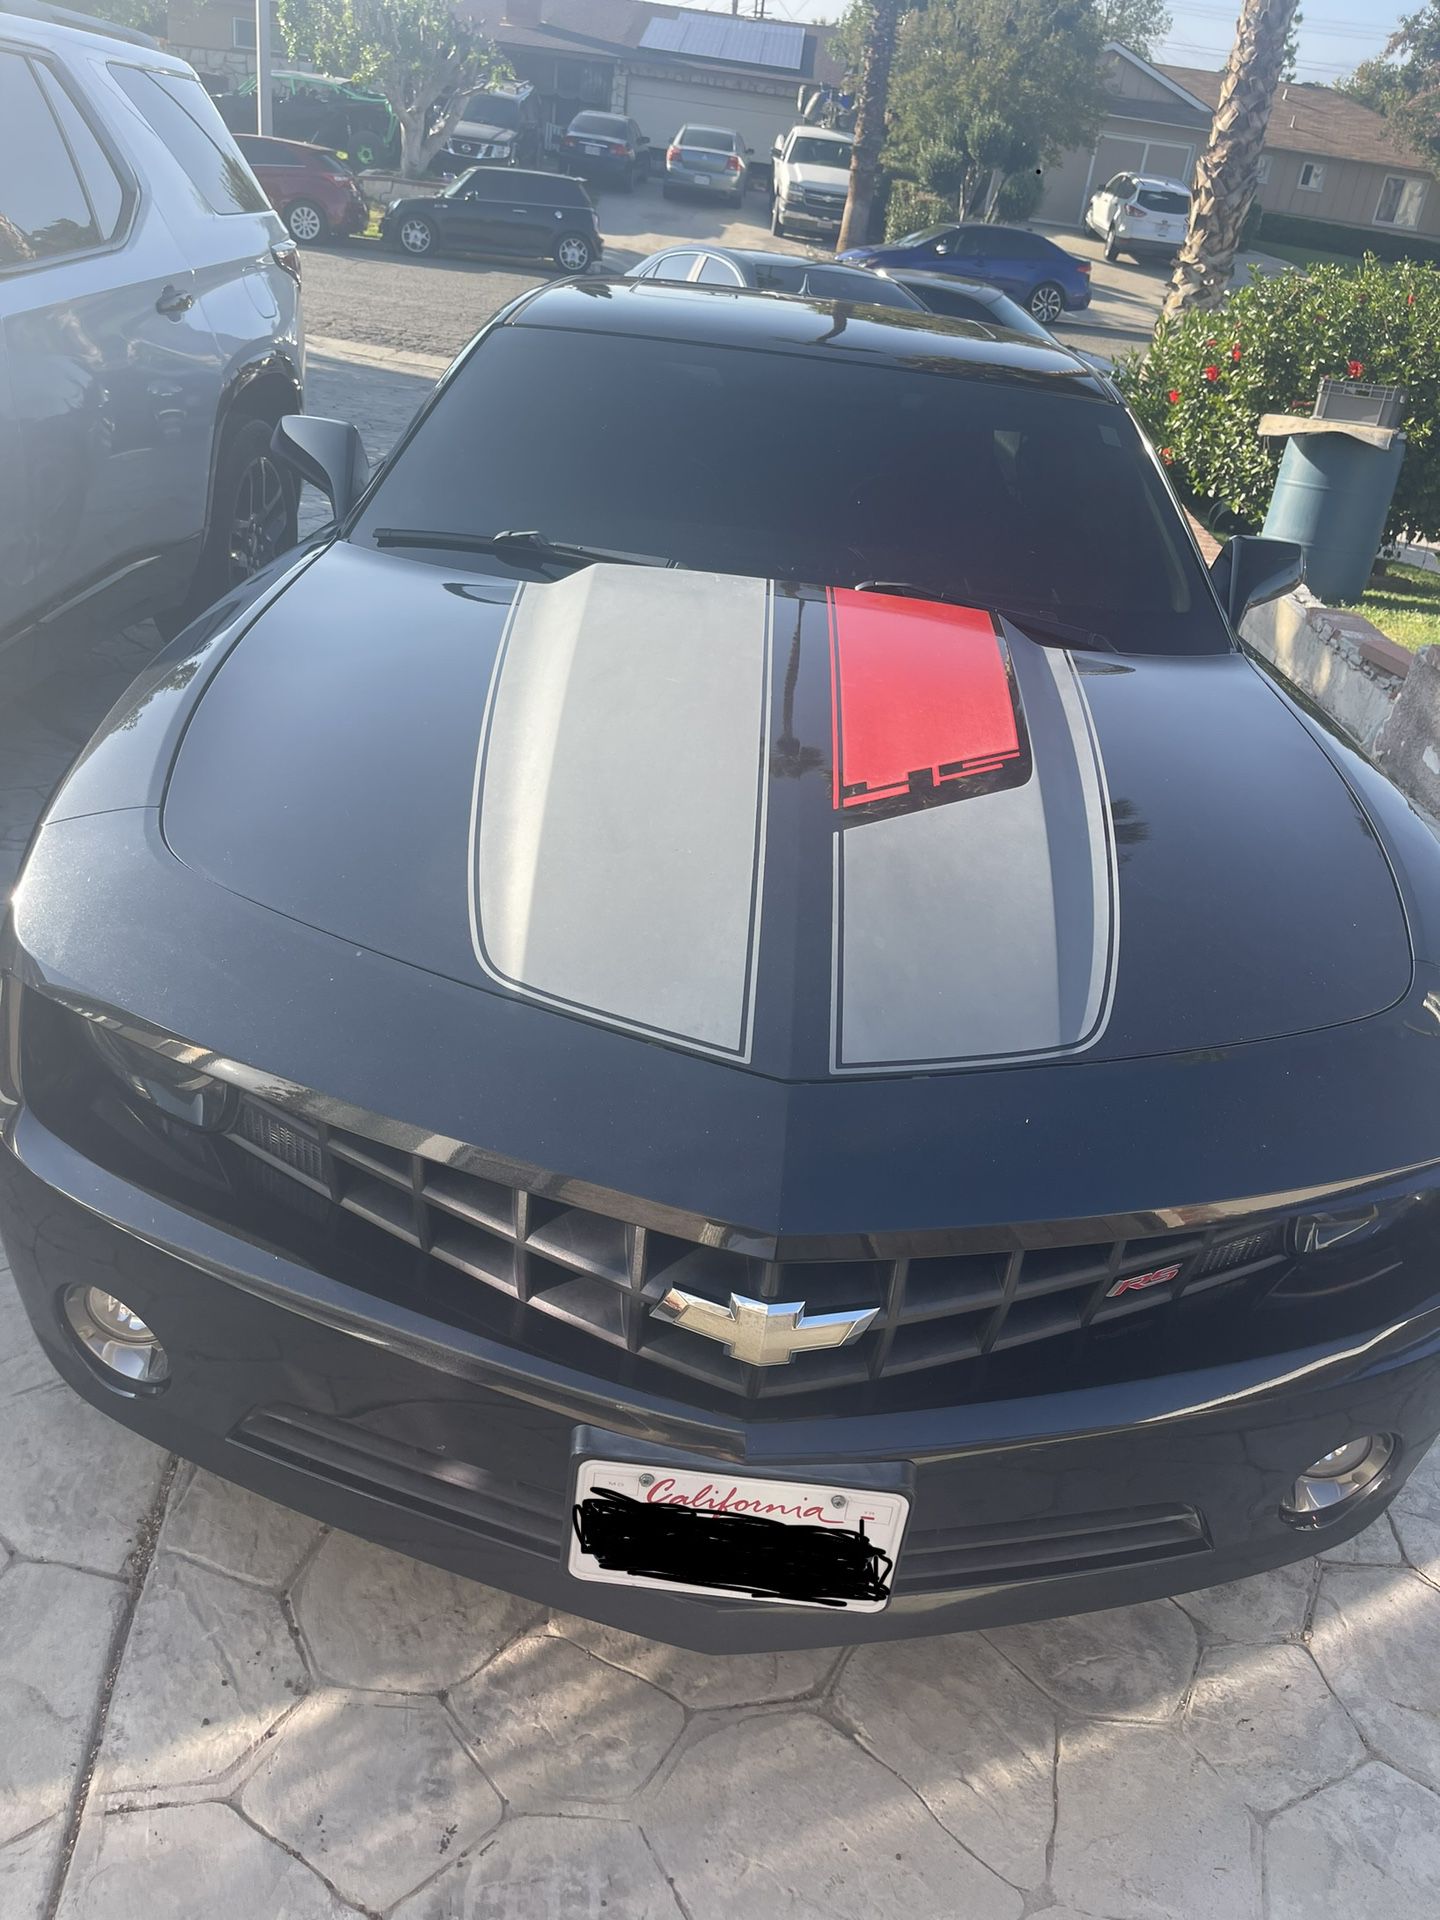 Chevy Camaro 45th Anniversary Limited edition